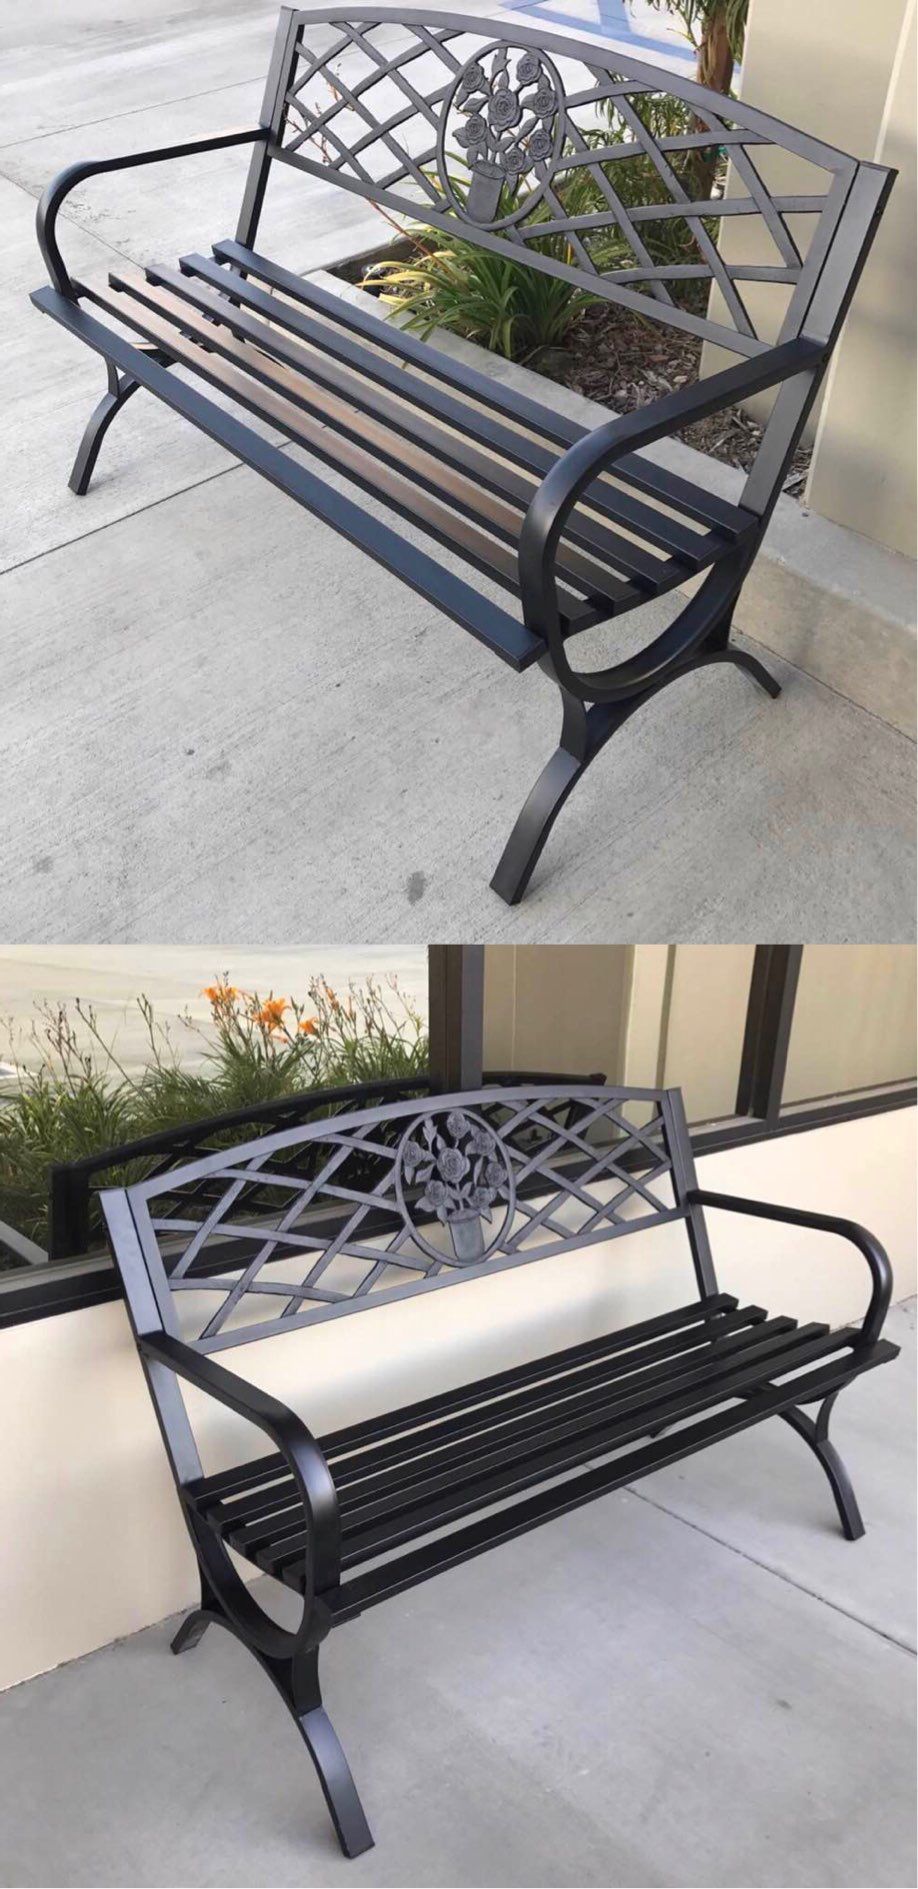 New in box $70 each 500 lbs weight capacity 50x24x34 inches tall outdoor patio garden steel bench chair